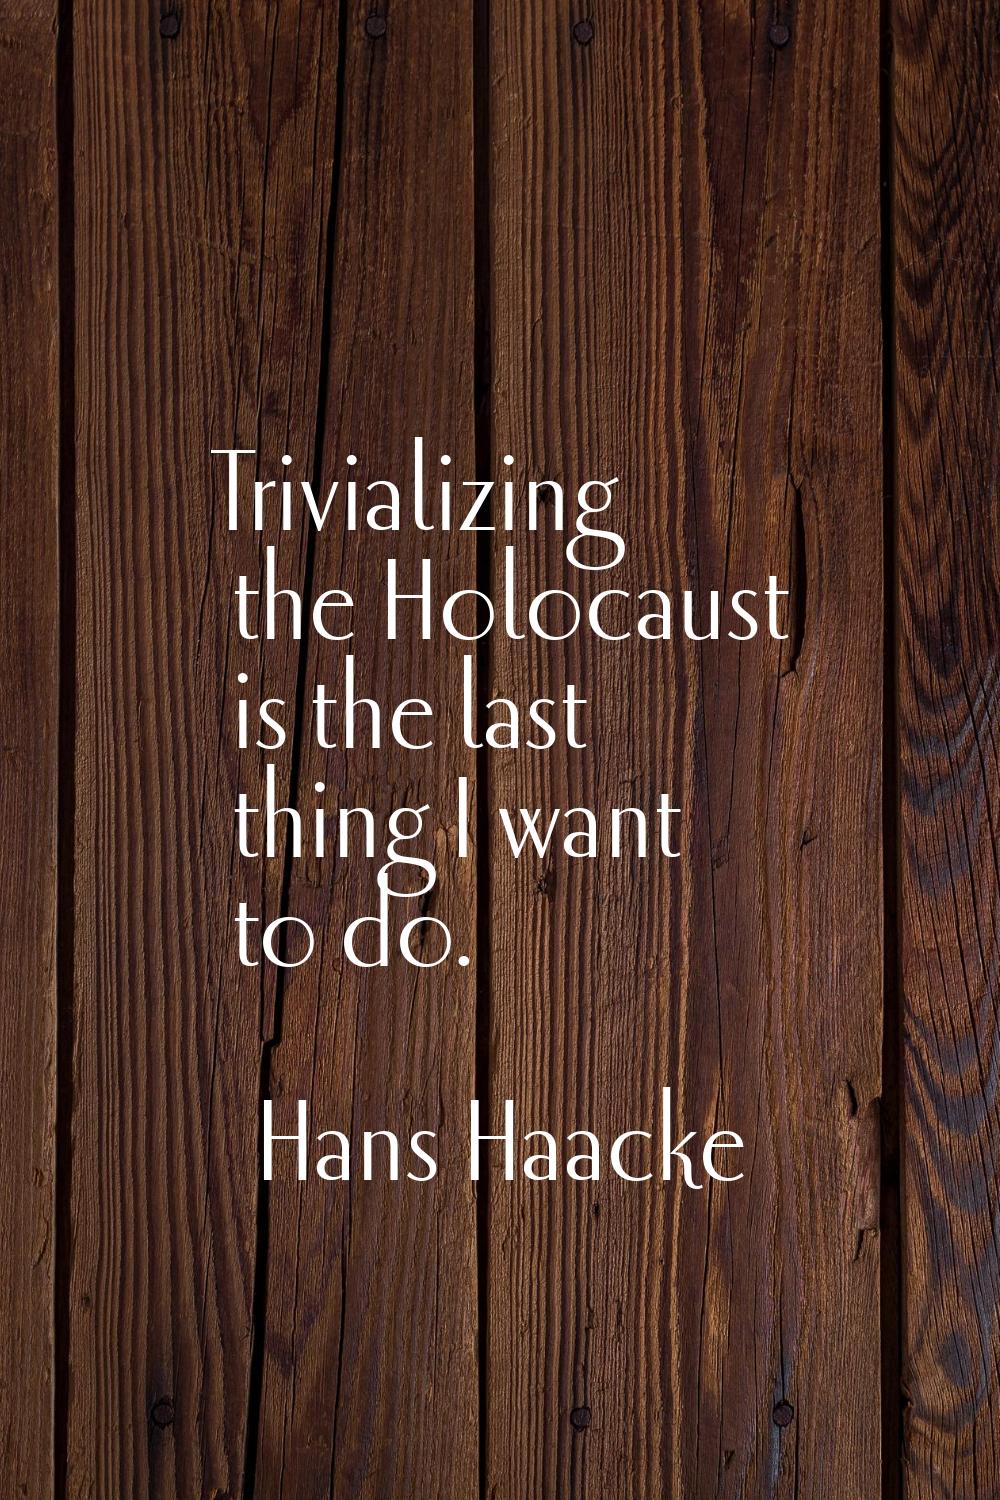 Trivializing the Holocaust is the last thing I want to do.